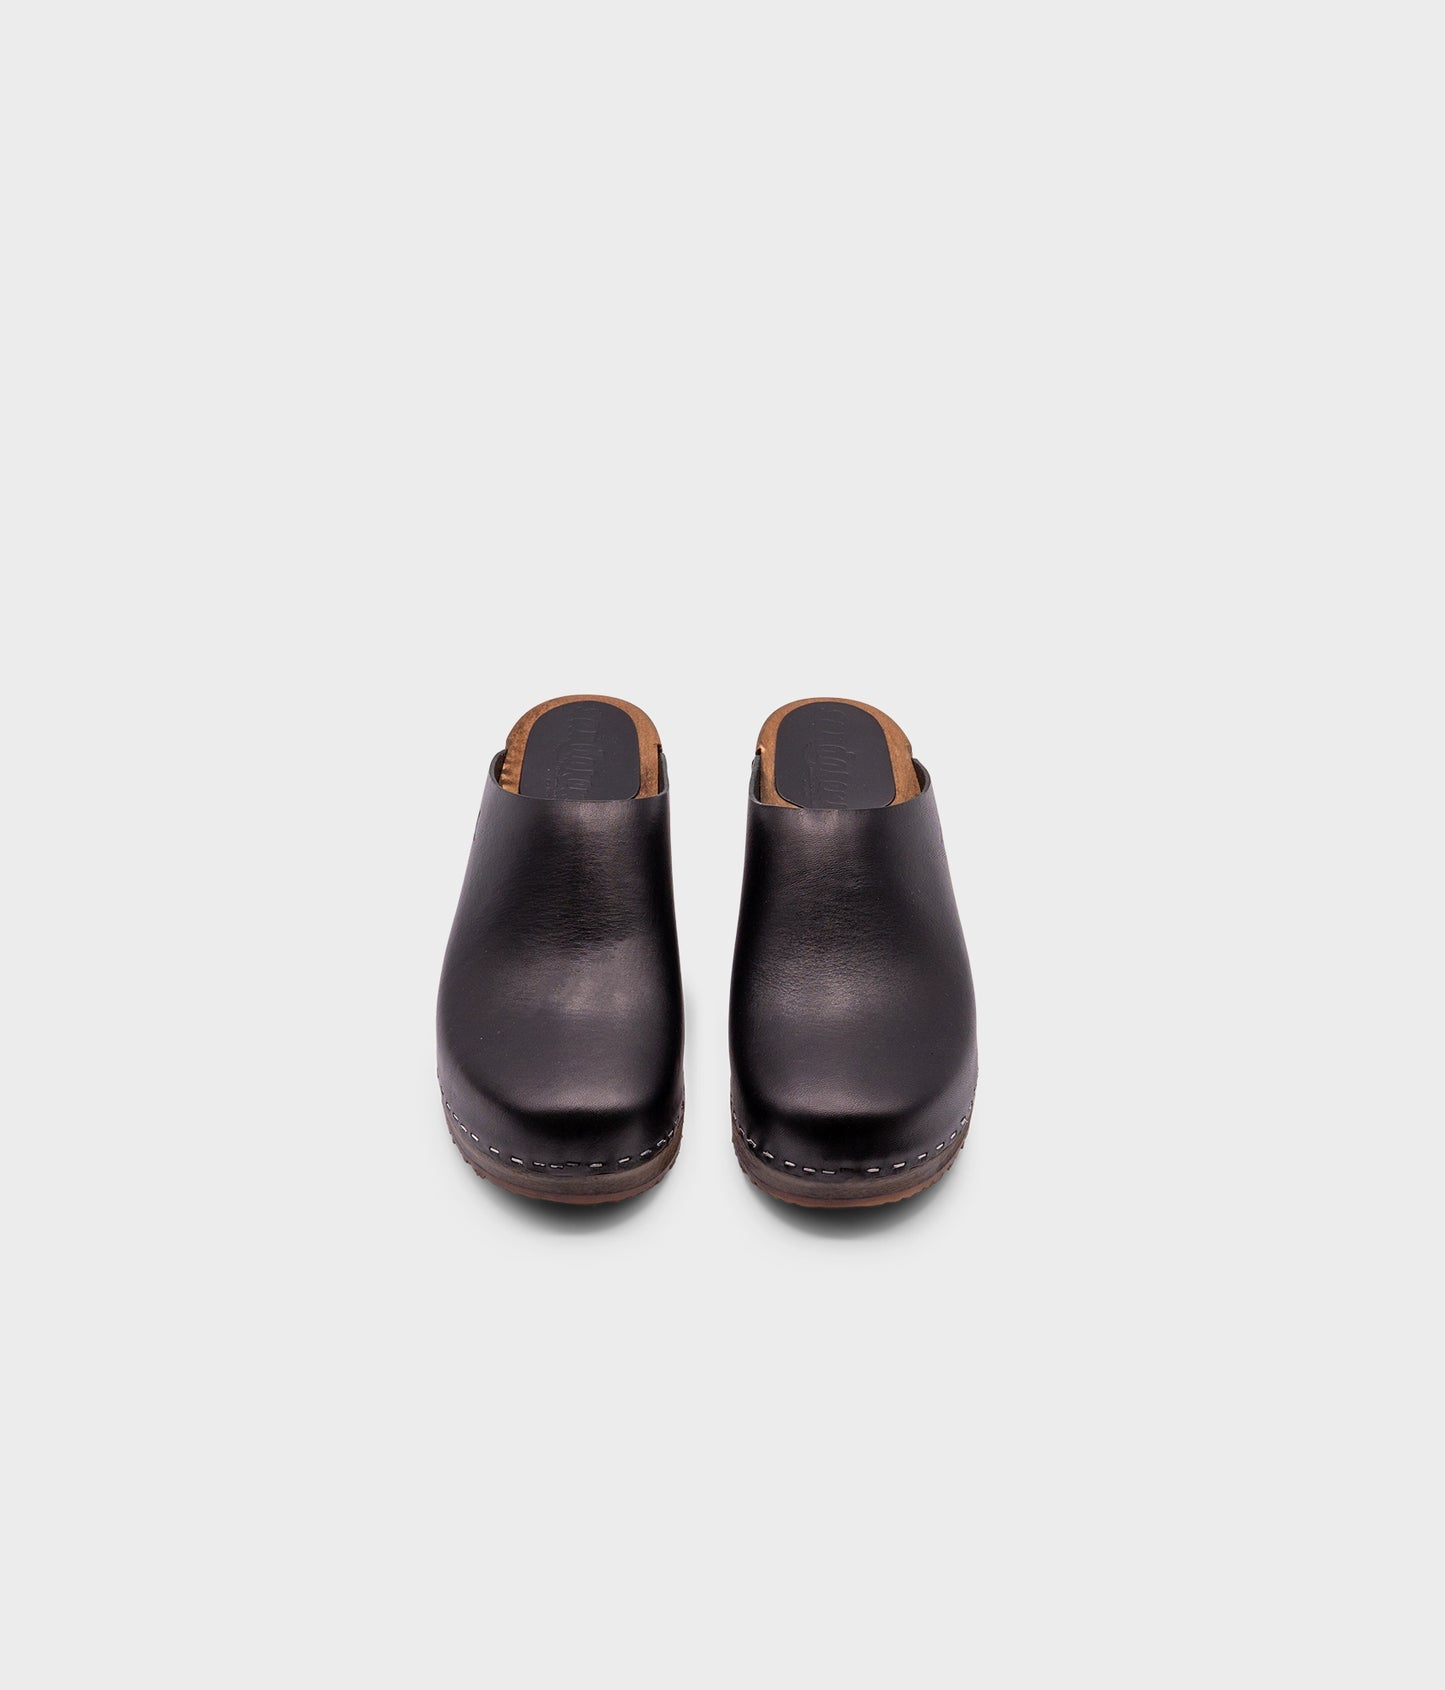 low heeled minimalistic clog mules in black vegetable tanned leather stapled on a dark wooden base